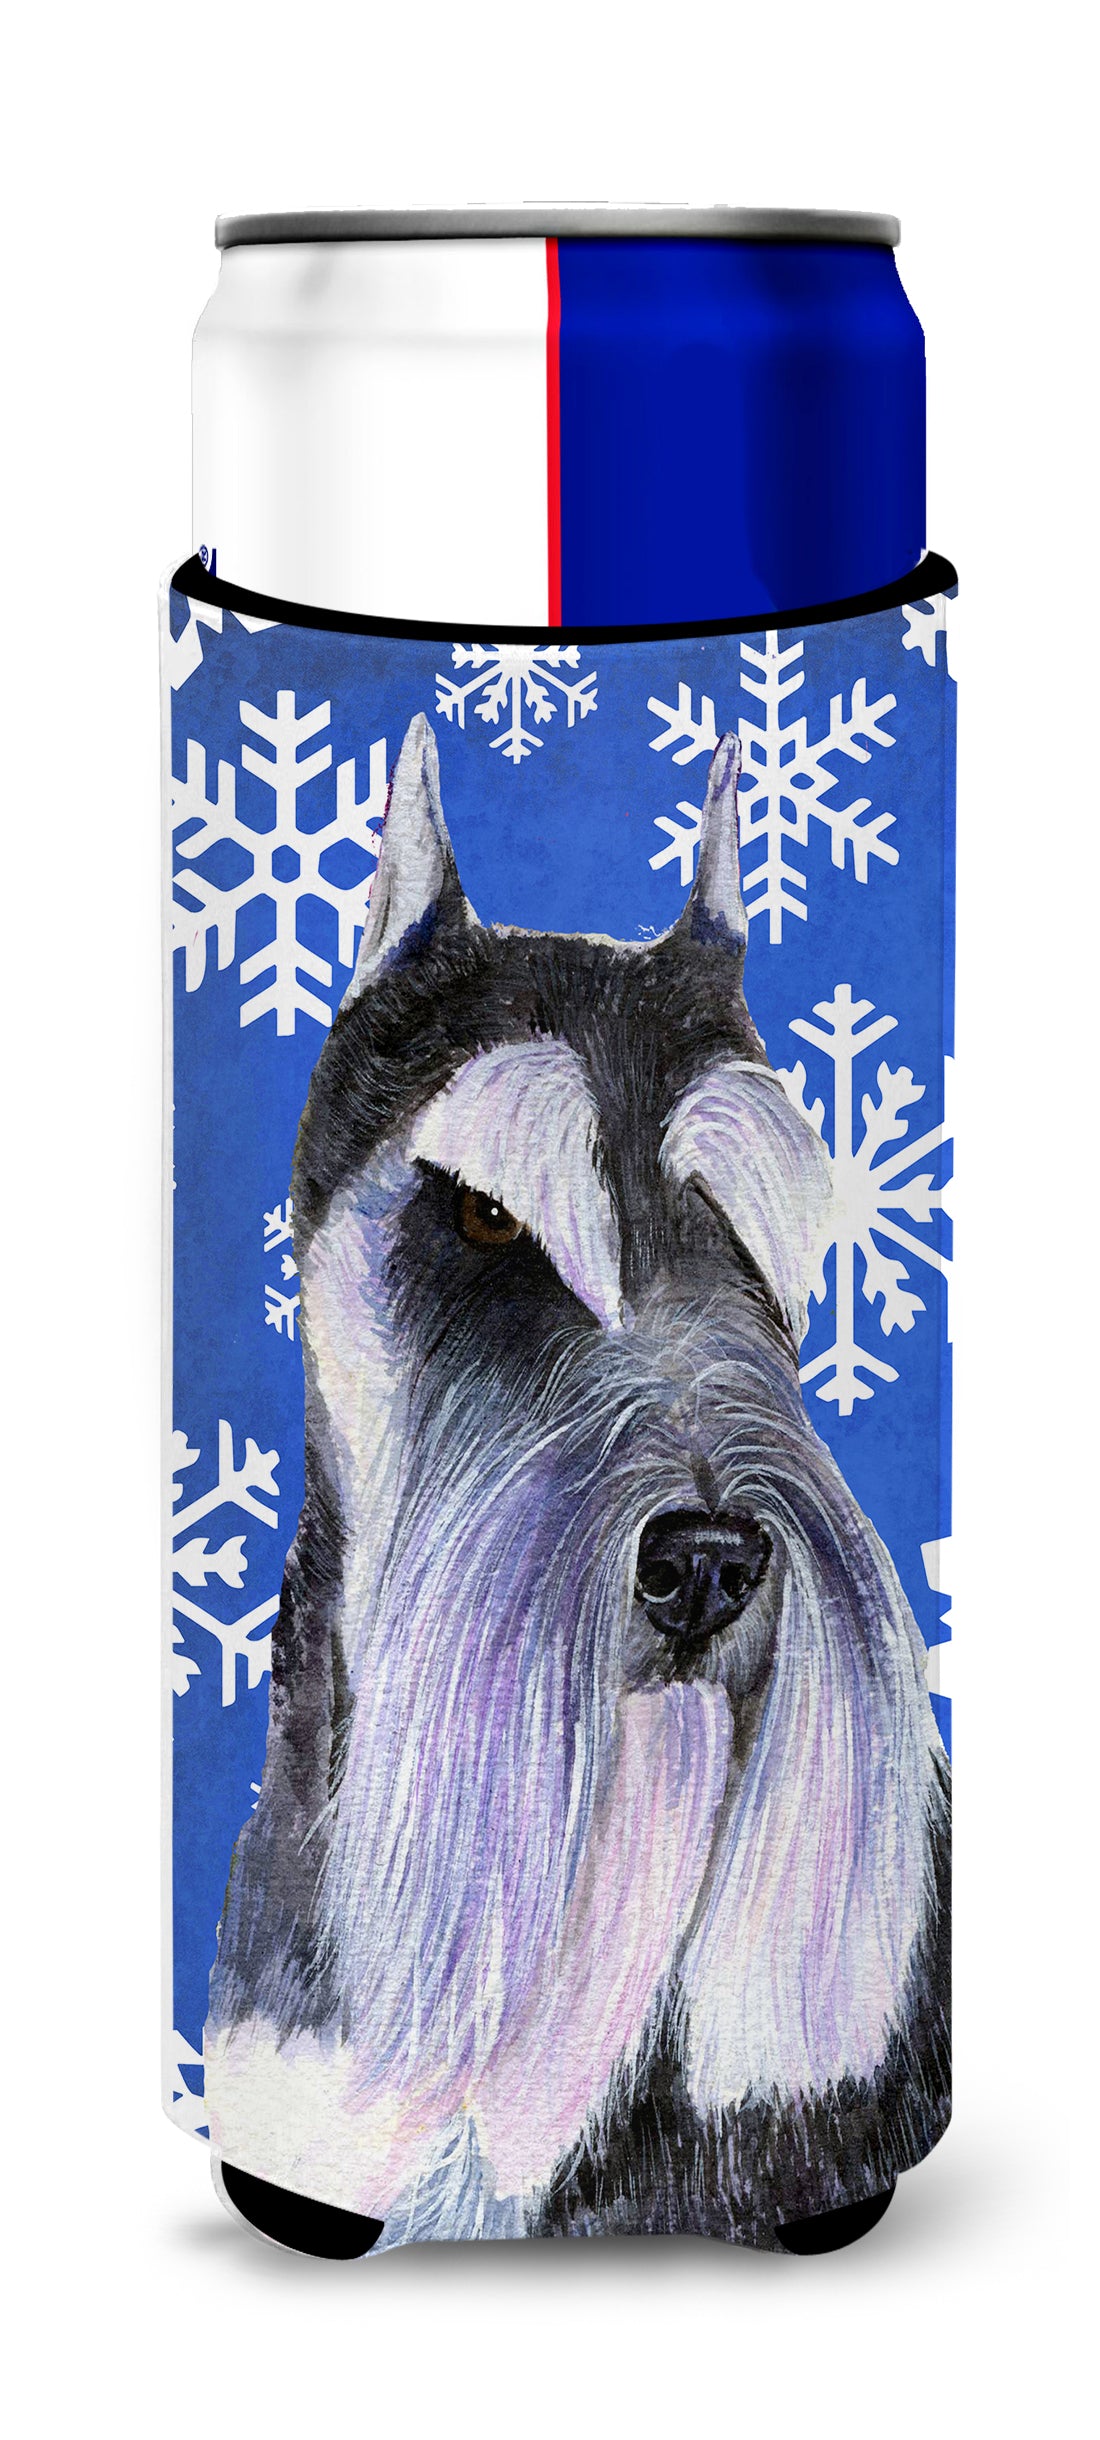 Schnauzer Winter Snowflakes Holiday Ultra Beverage Insulators for slim cans SS4615MUK.